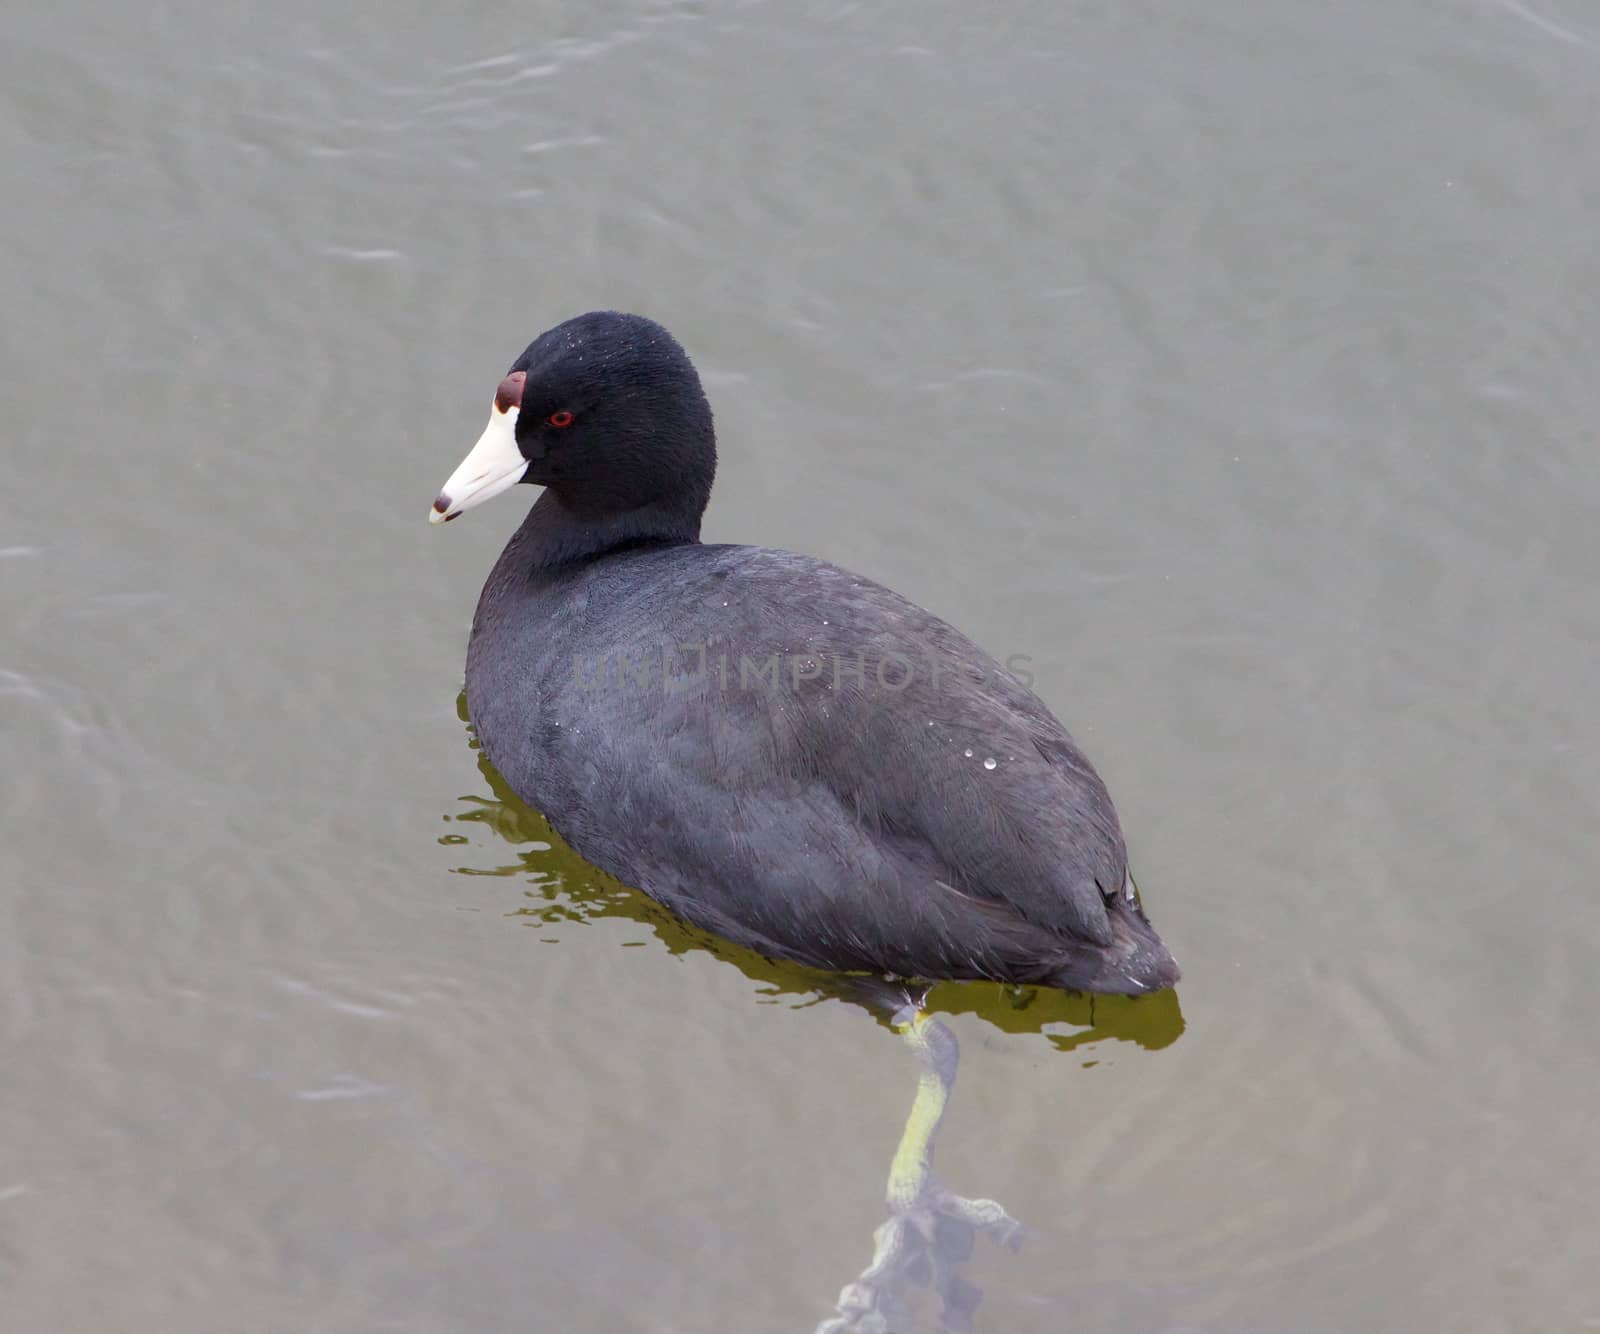 The American coot is swimming